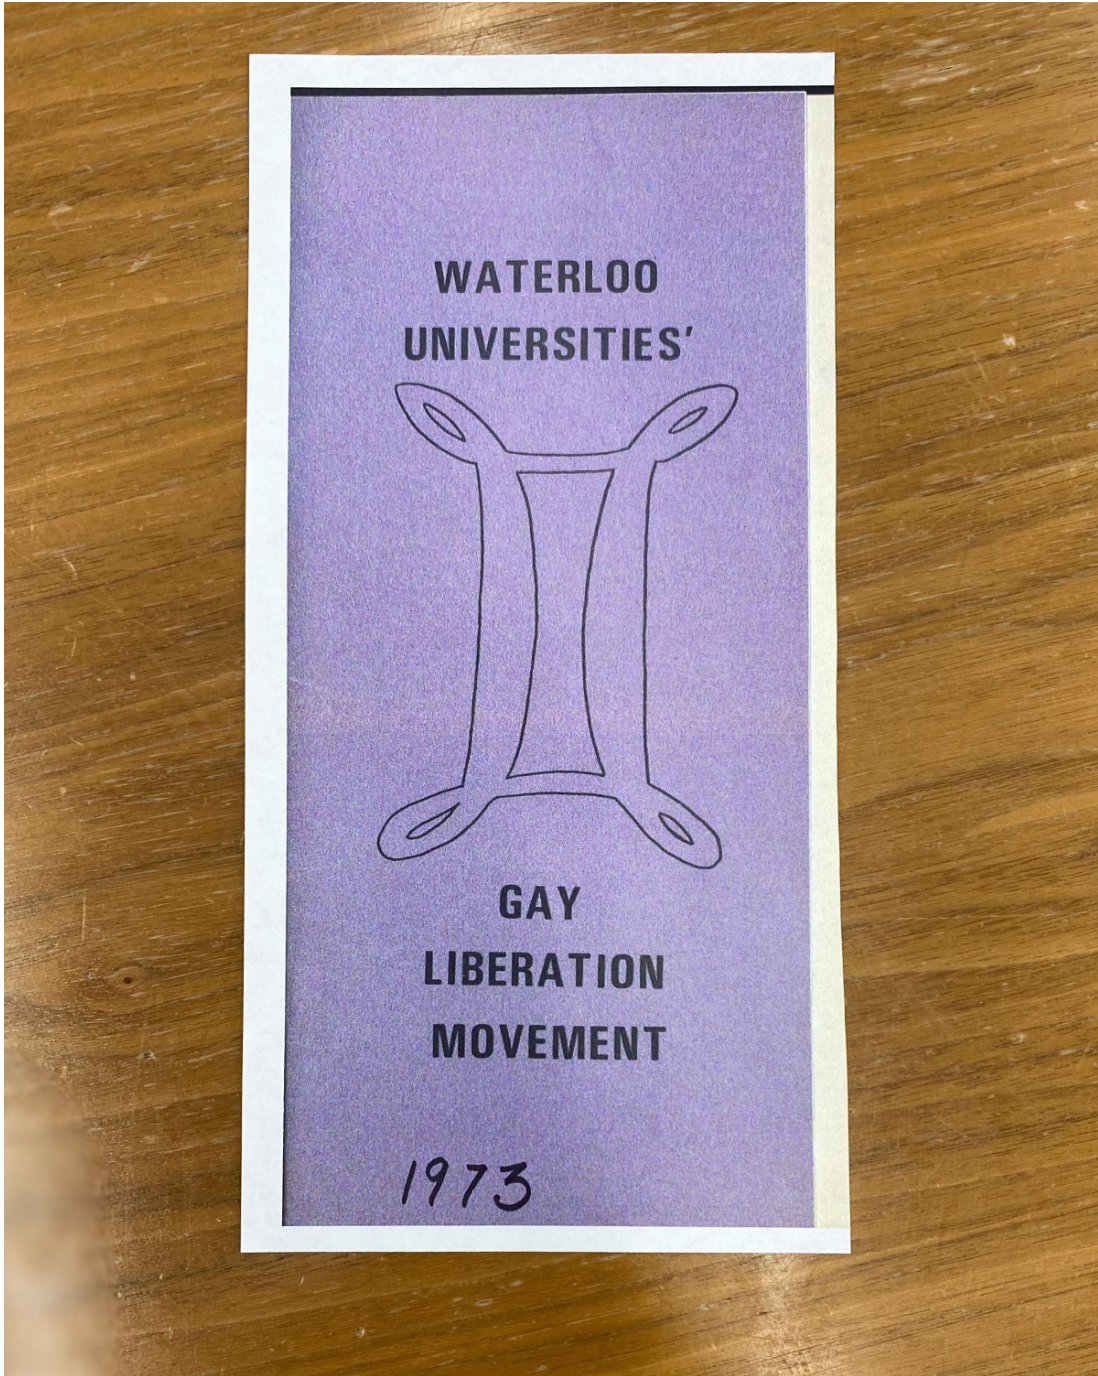 Photo of cover of a pamphlet produced by the Waterloo Universities' Gay Liberation Movement in 1973